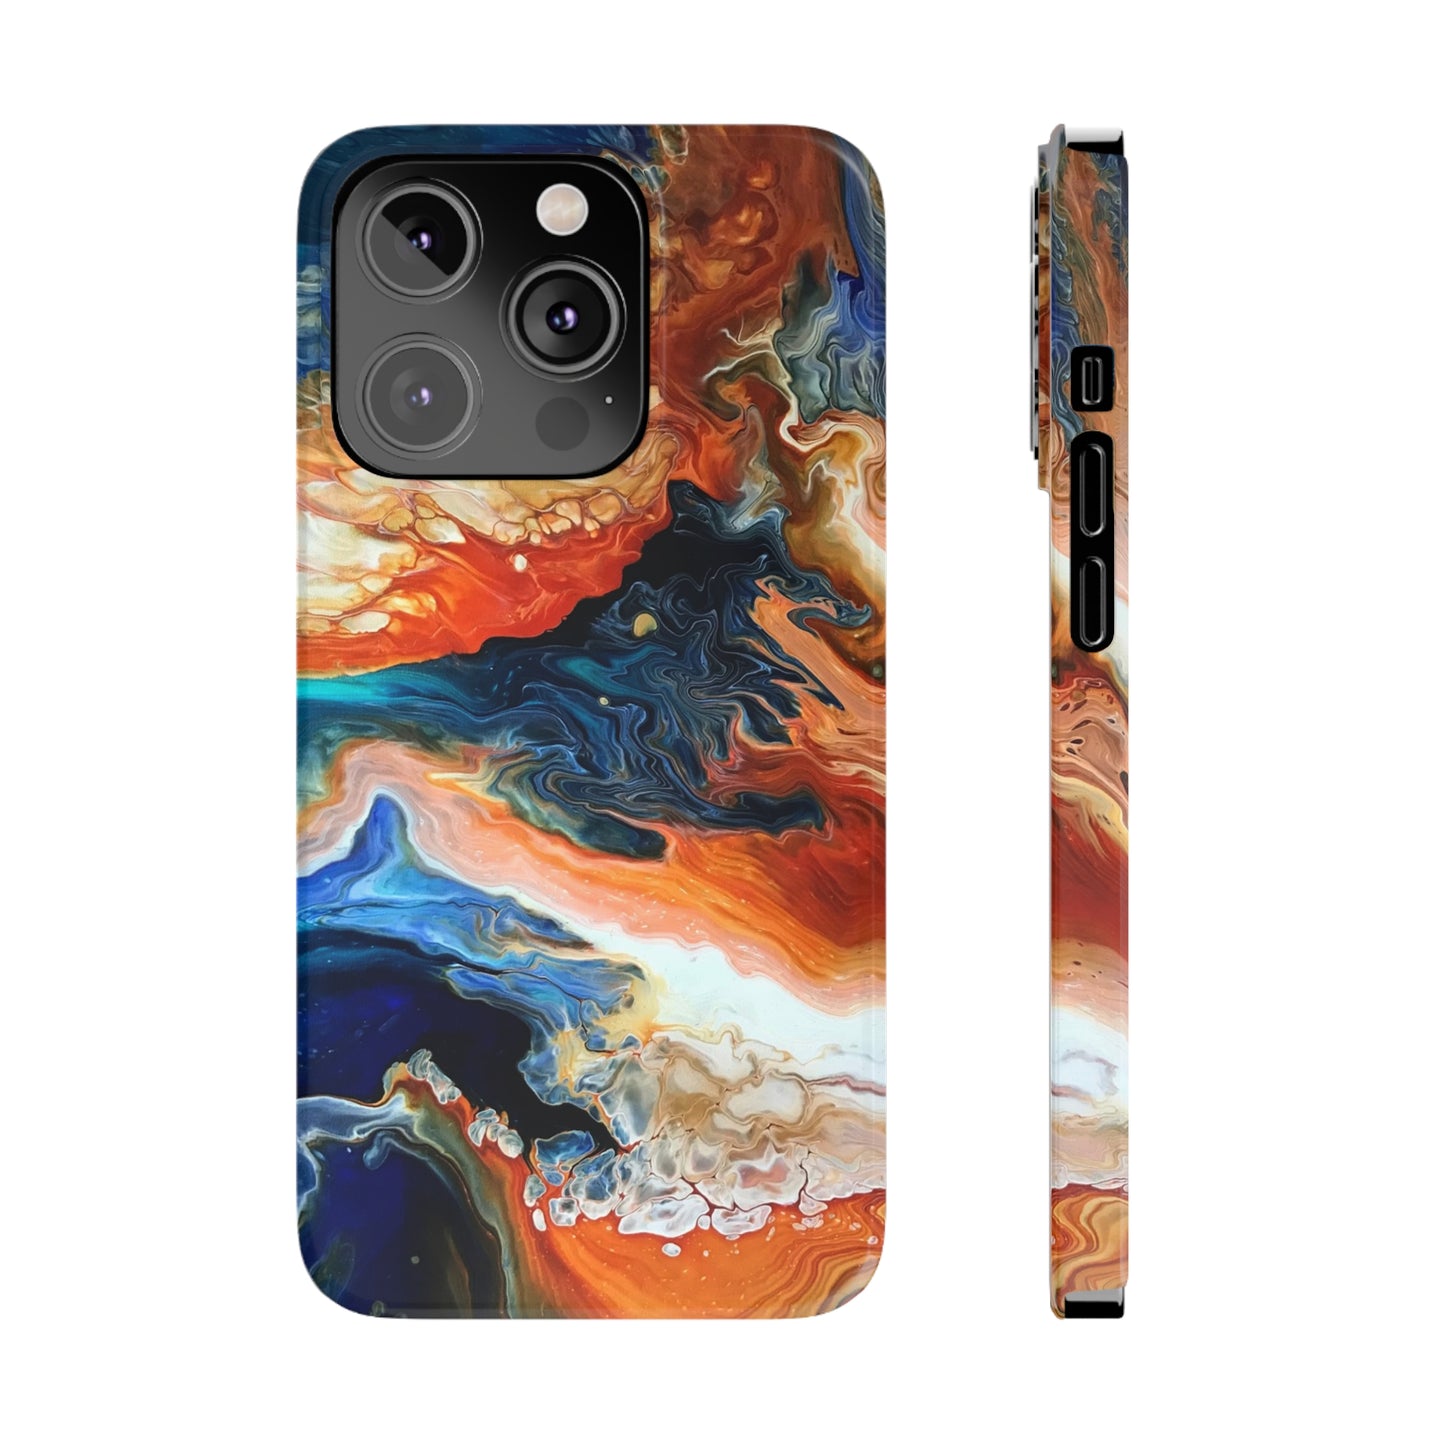 Southwest Scene Inspired Slim iPhone and Samsung Phone Cases